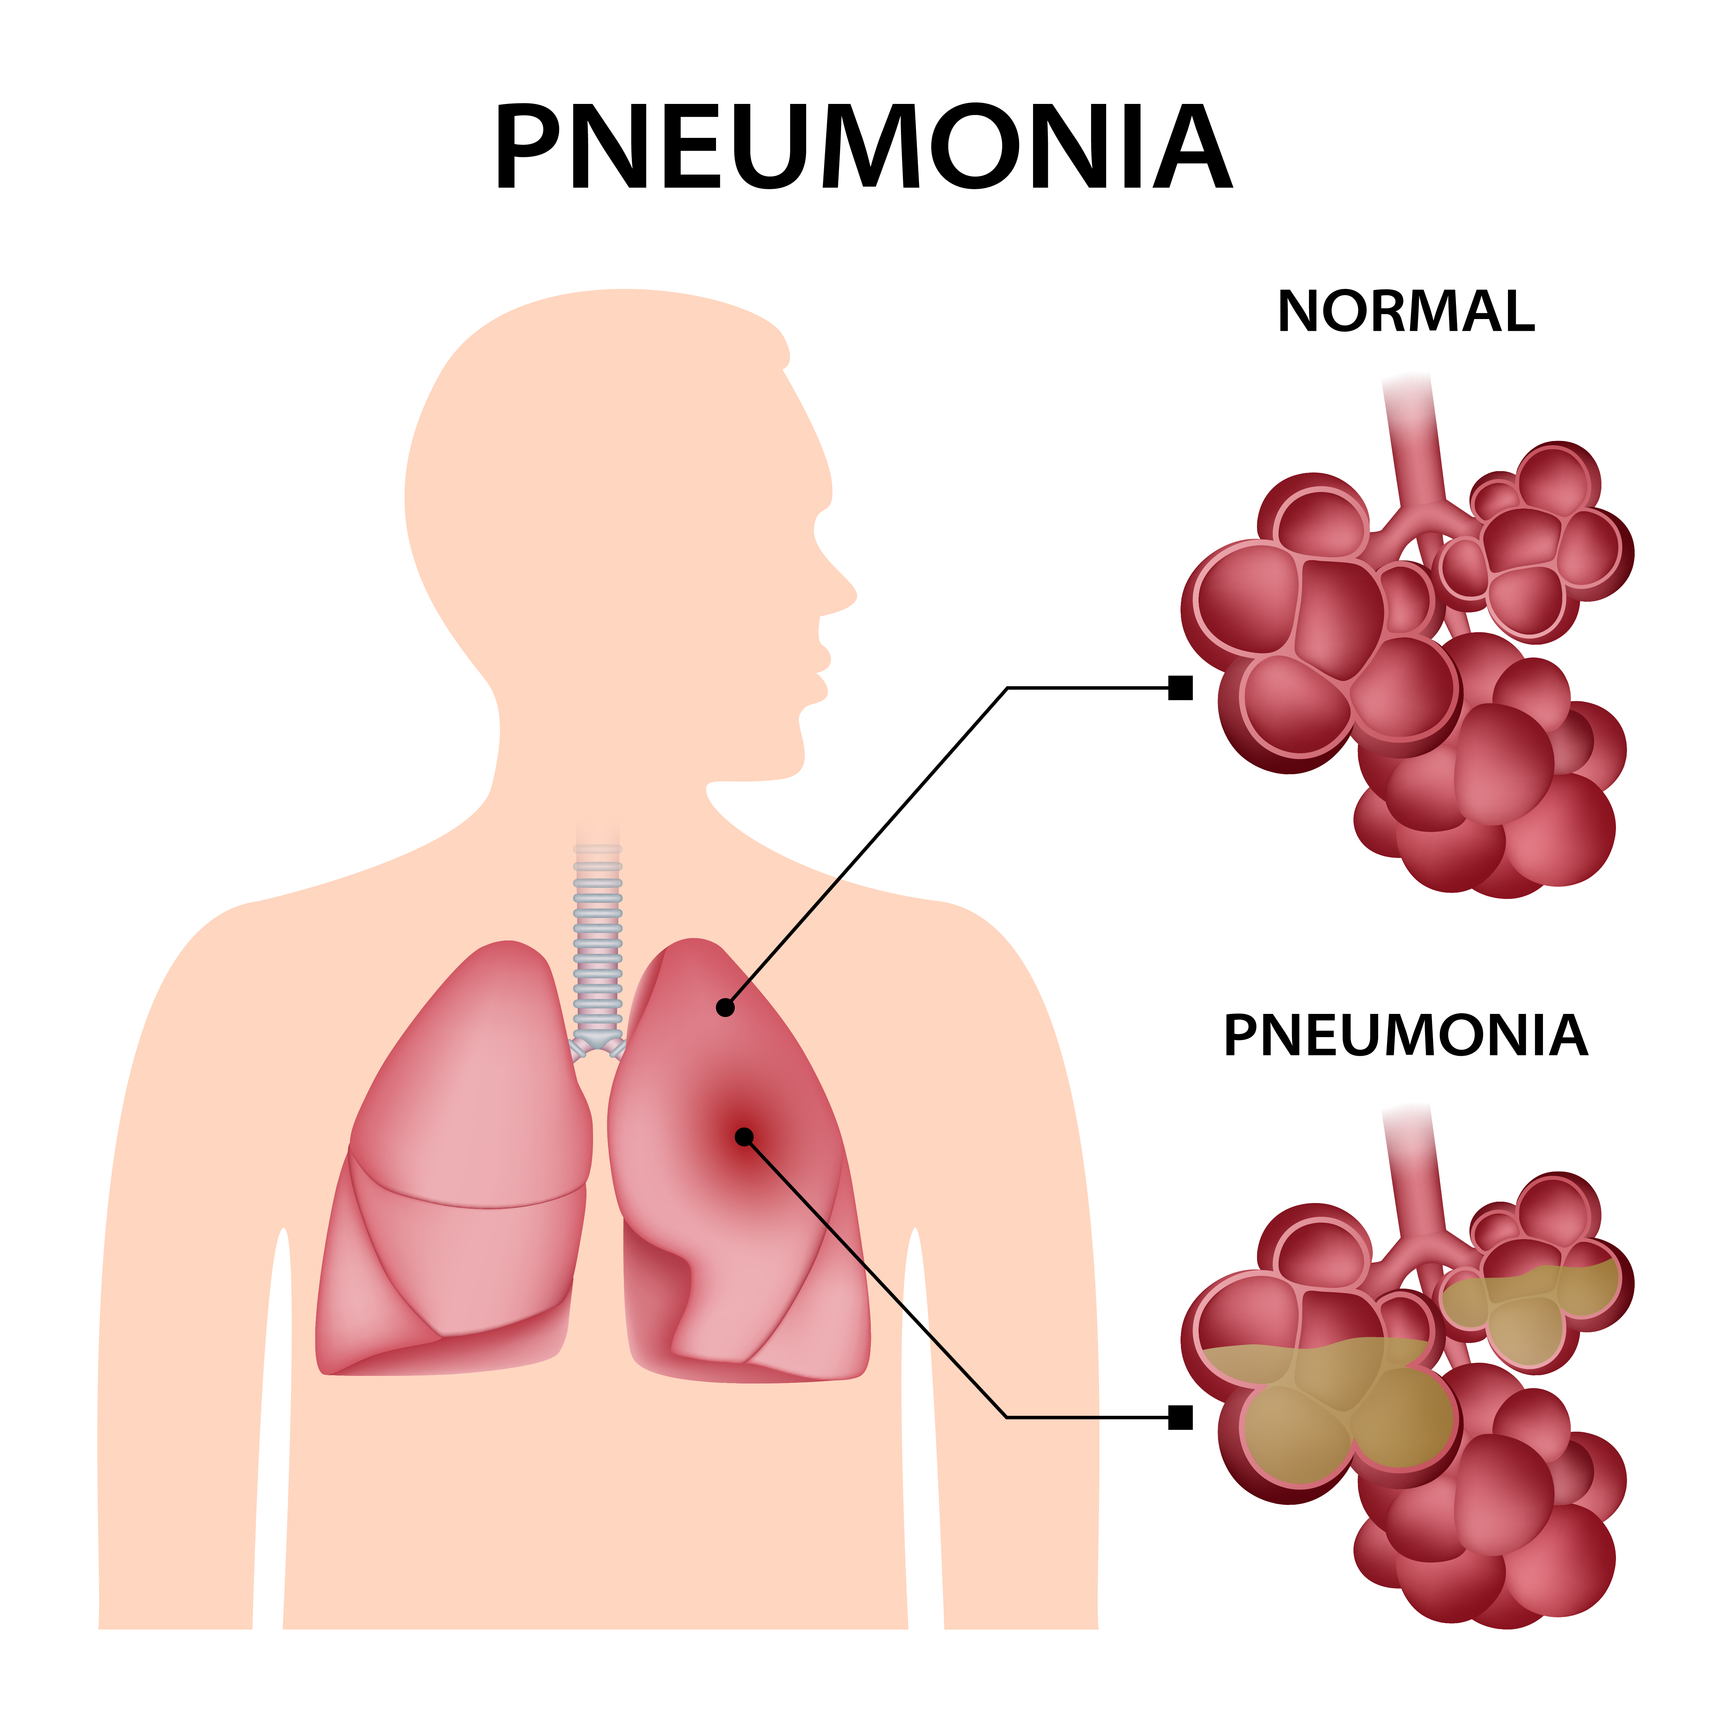 what are the signs and symptoms of pneumonia